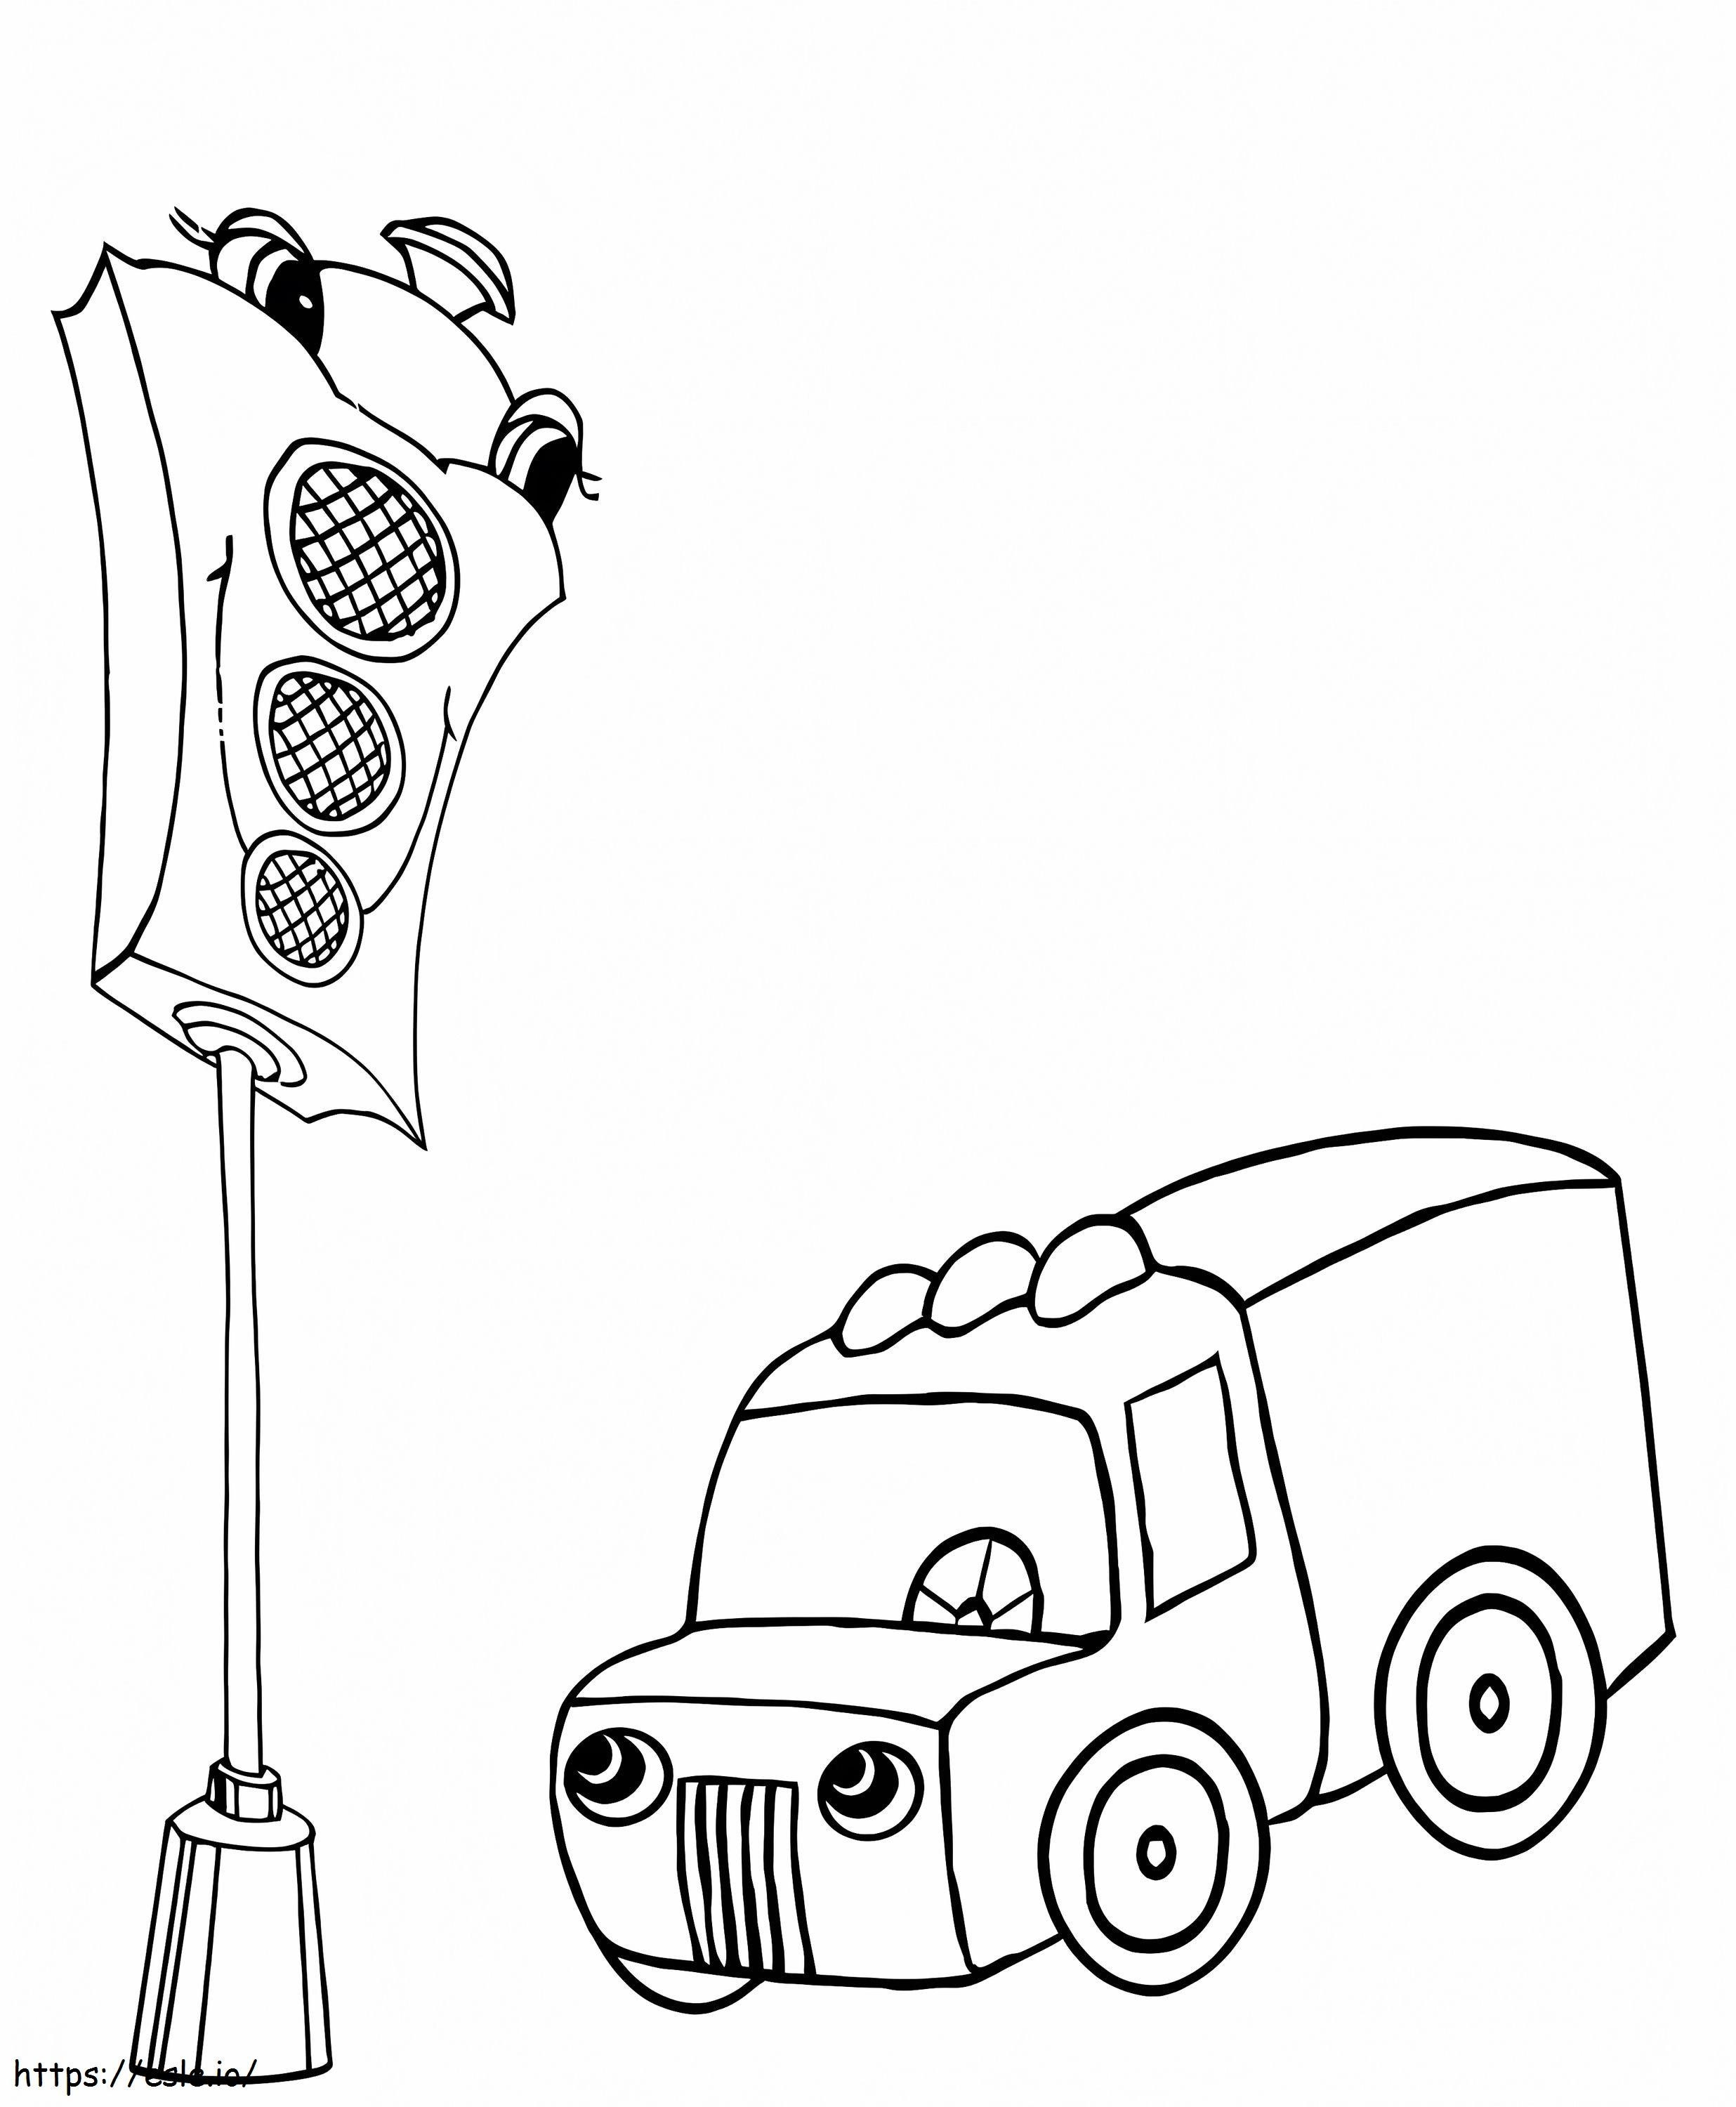 Cartoon Car And Traffic Light coloring page